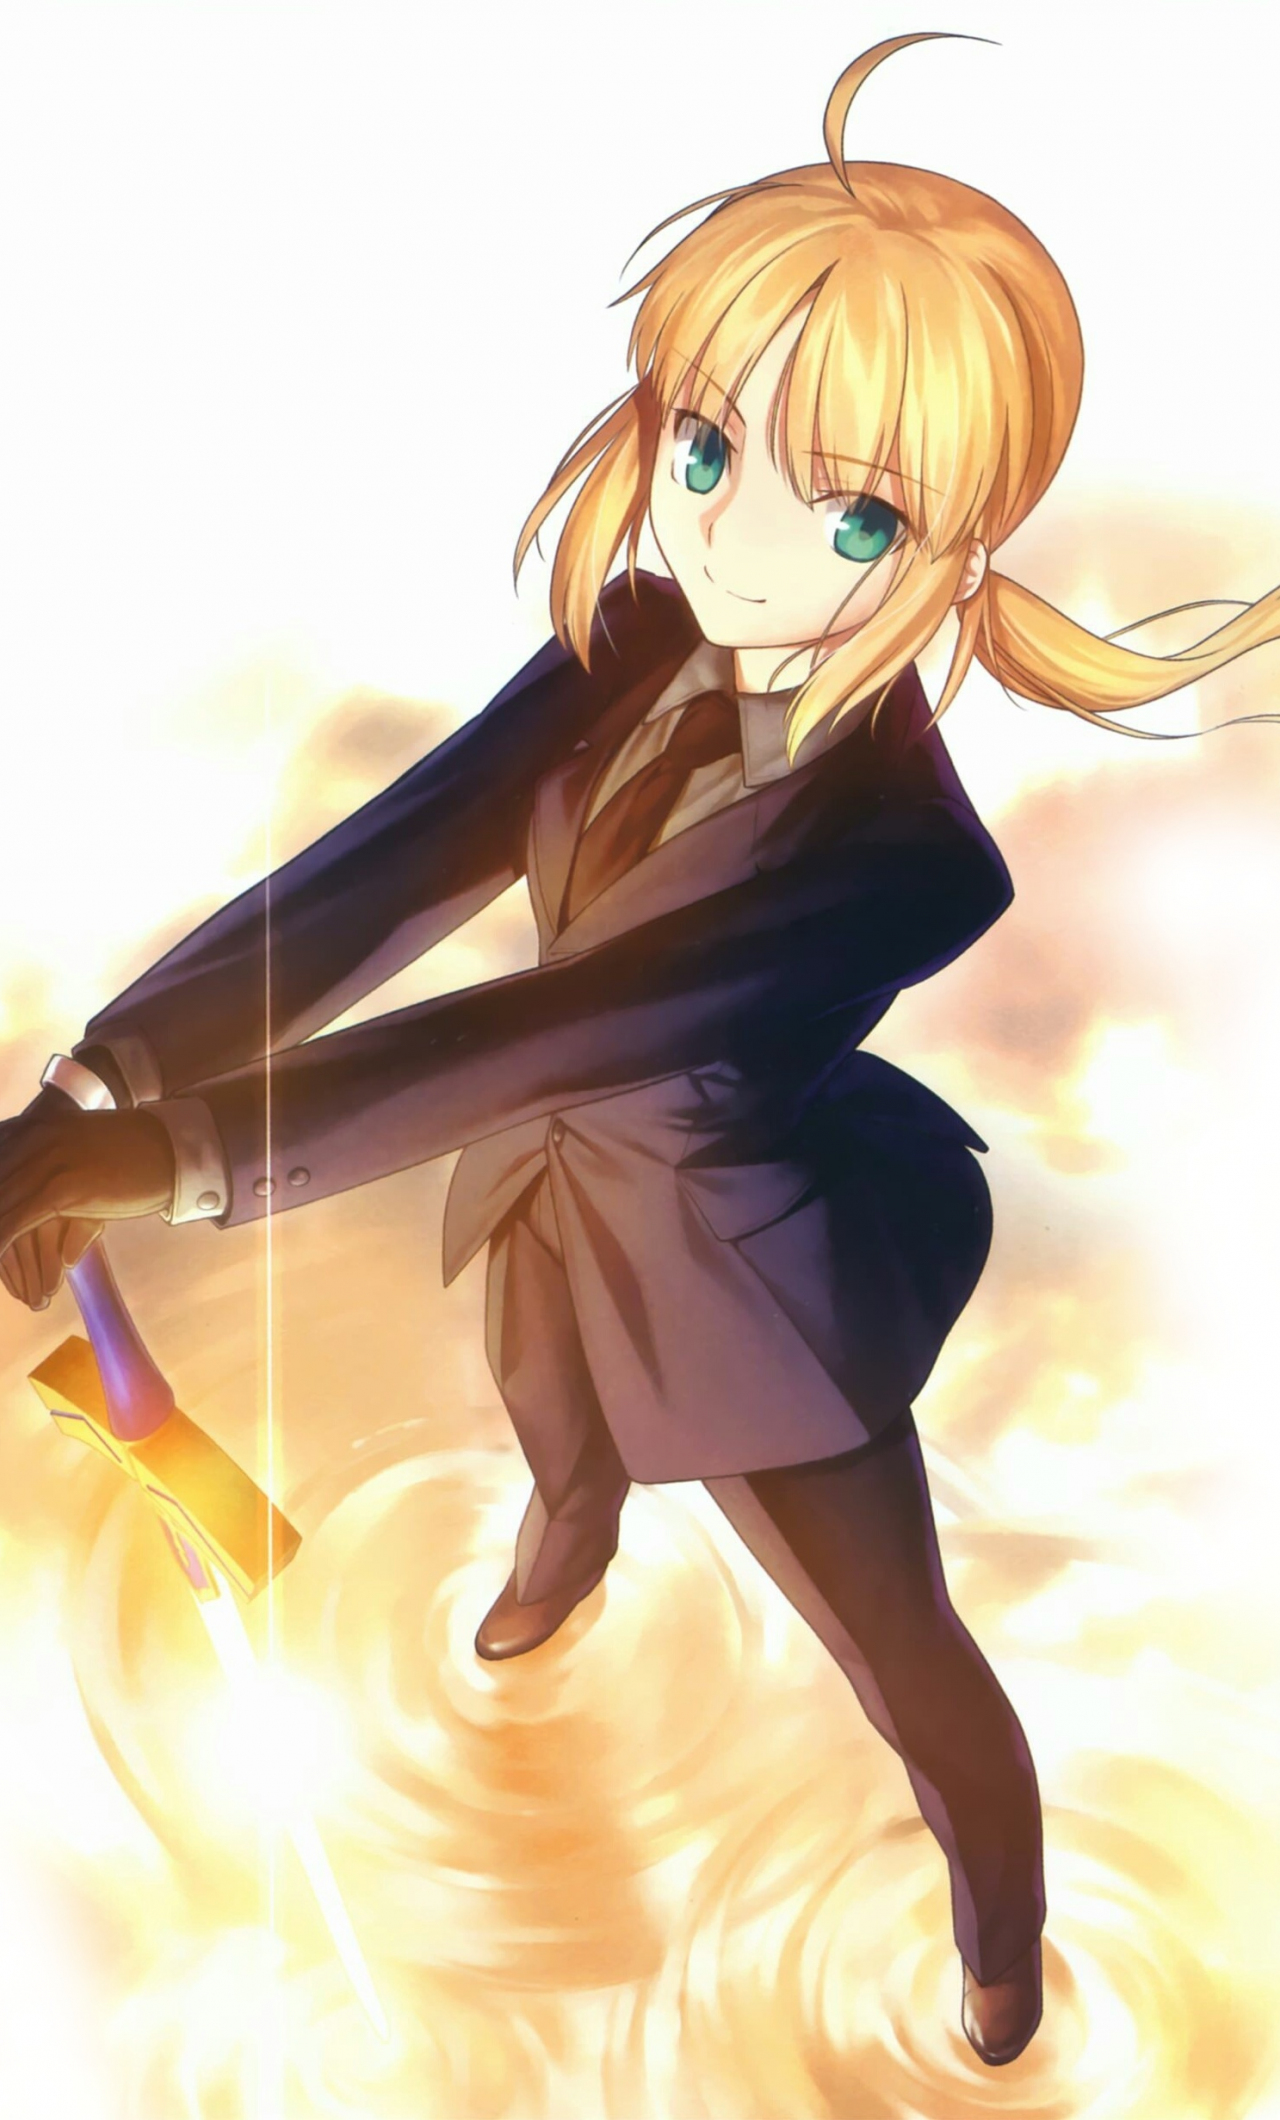 Download wallpaper 1280x2120 smile, confident, saber alter, fate series,  iphone 6 plus, 1280x2120 hd background, 8538